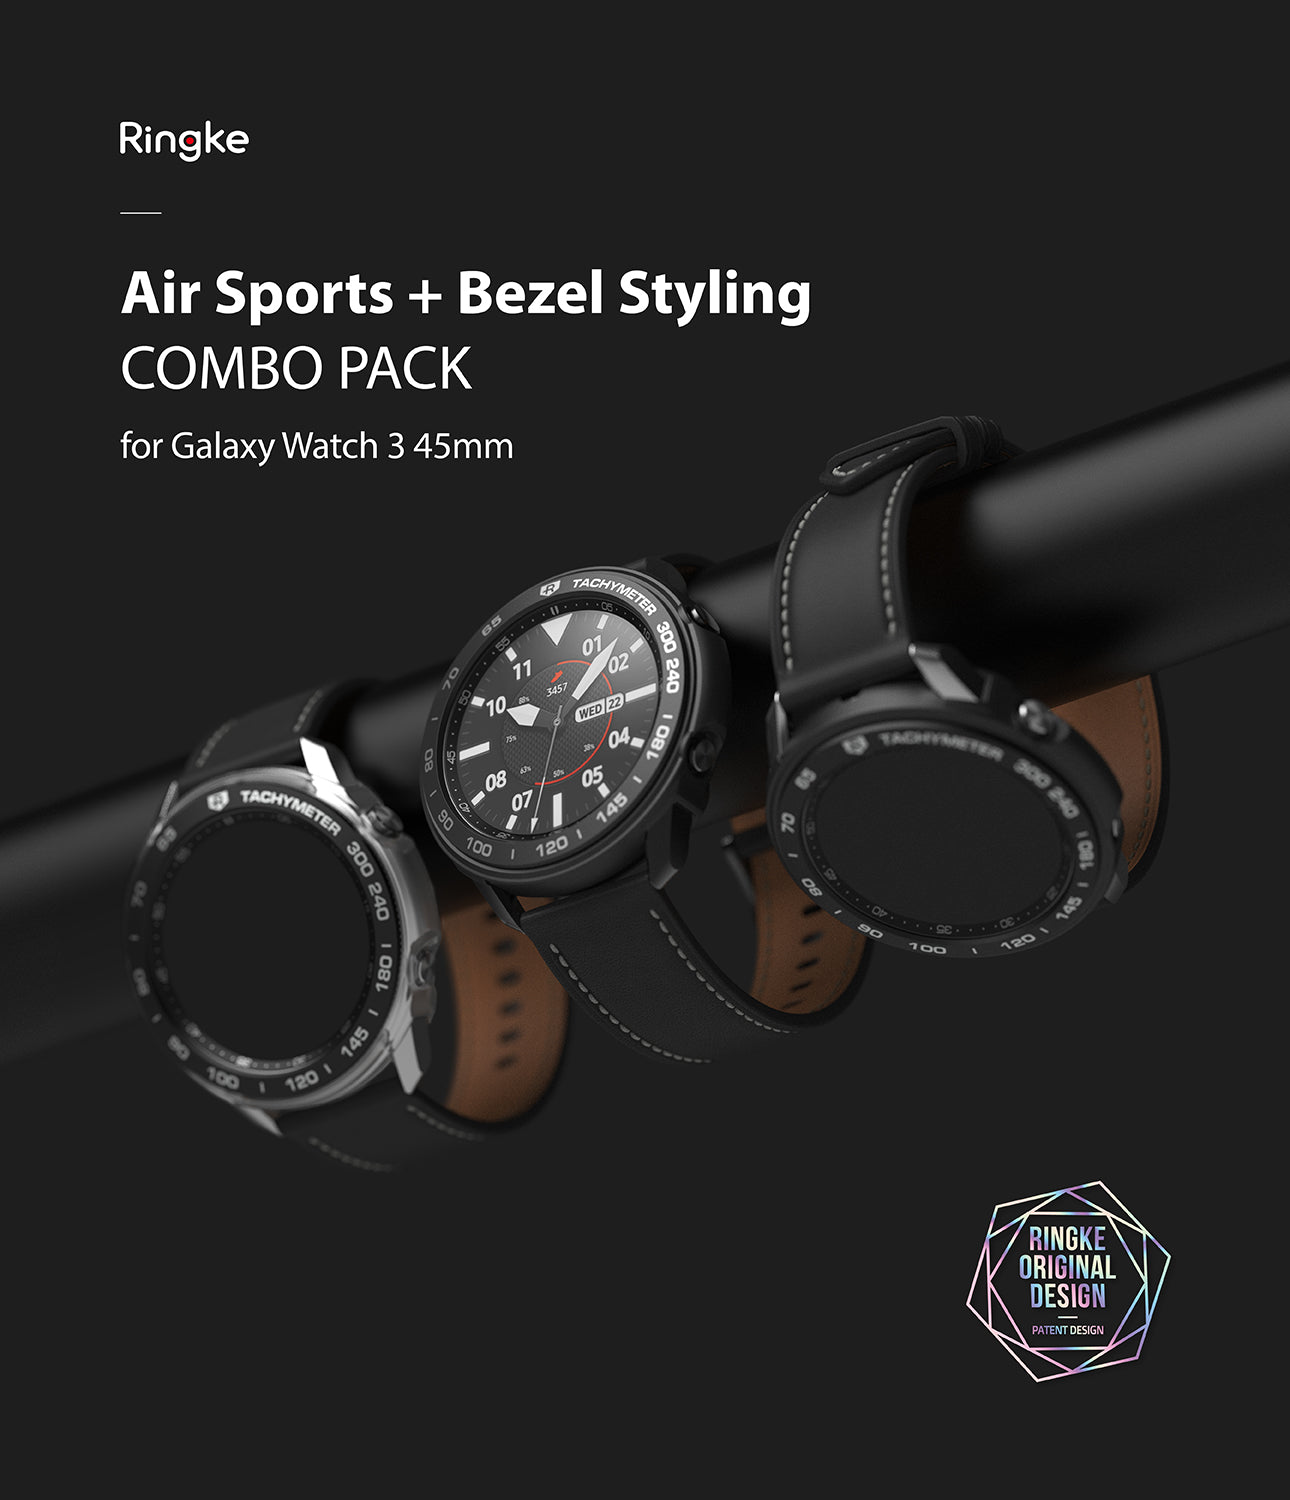 ringke air sports + bezel styling combo pack for samsung galaxy watch 3 45mm - black + 10